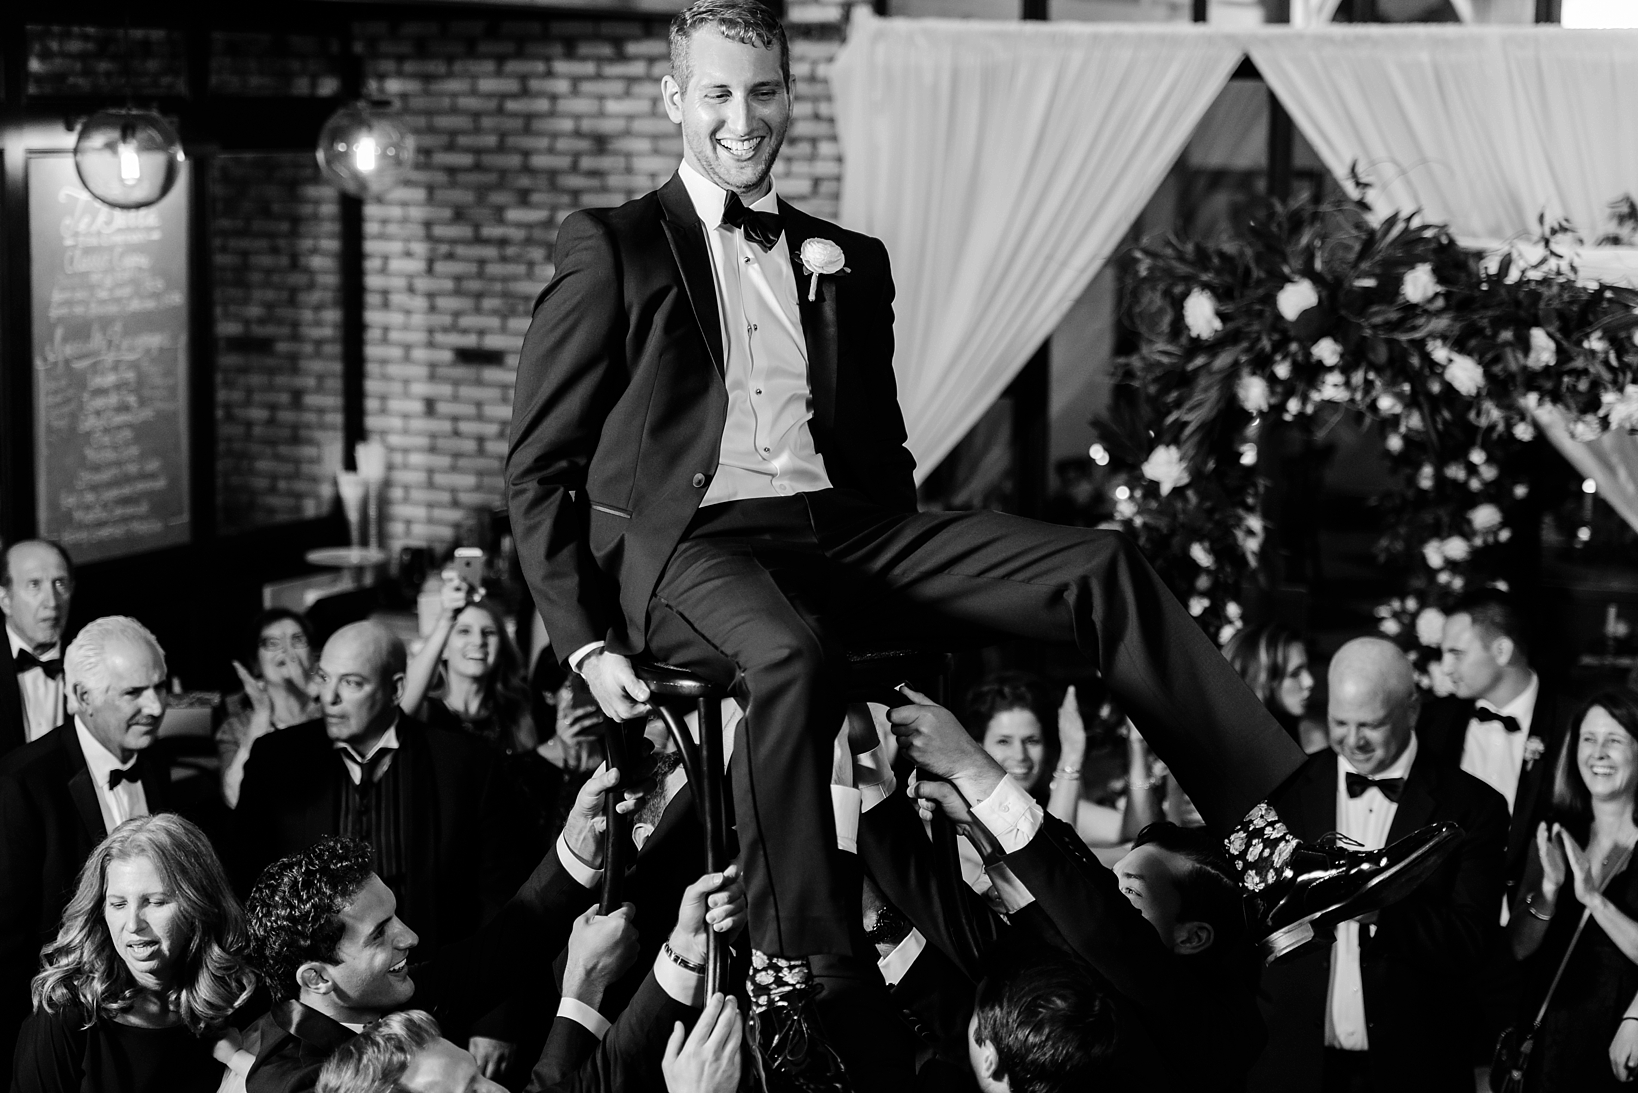 The Groom is lifted up in the air by his groomsmen during the reception celebration by Sarah & Ben Photography